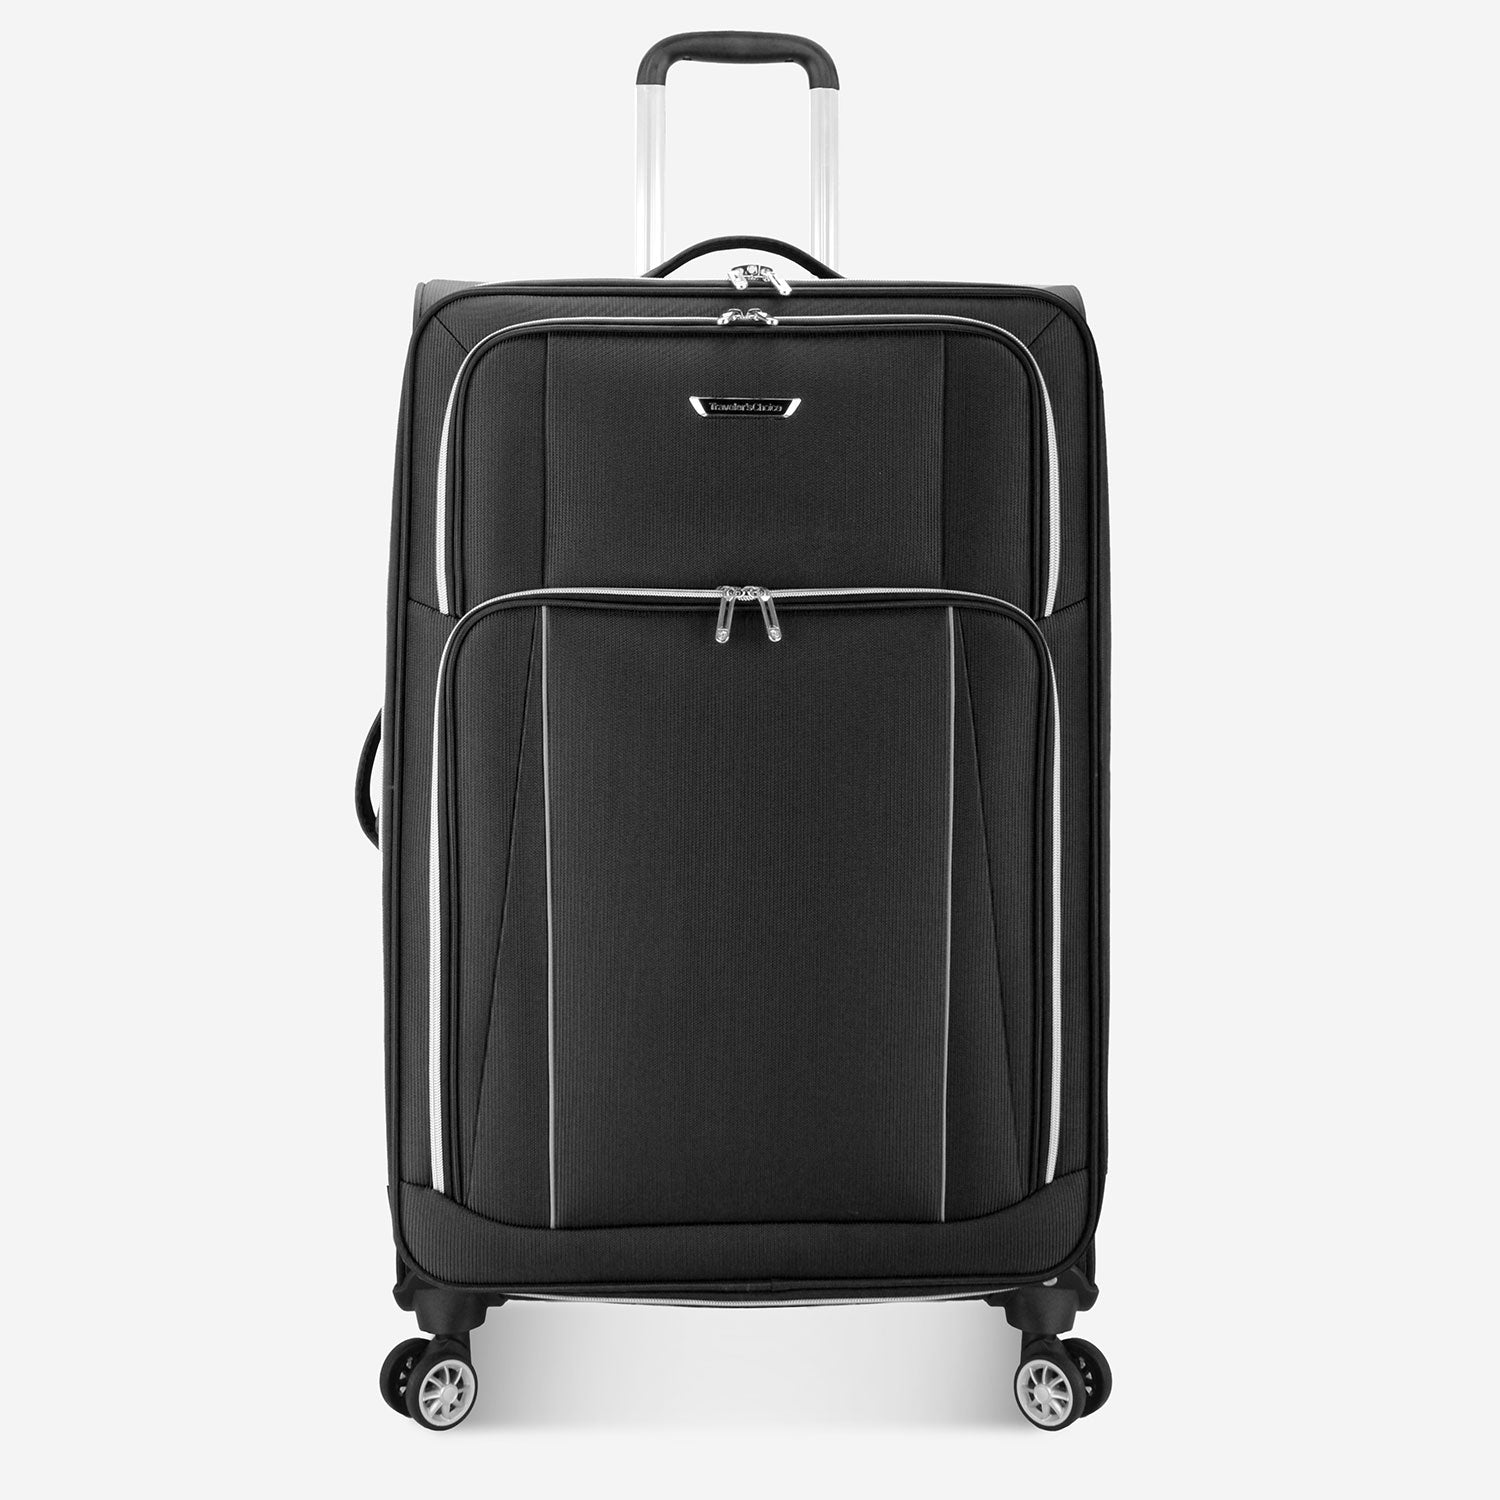 An front image of Lares Large Luggage Spinner